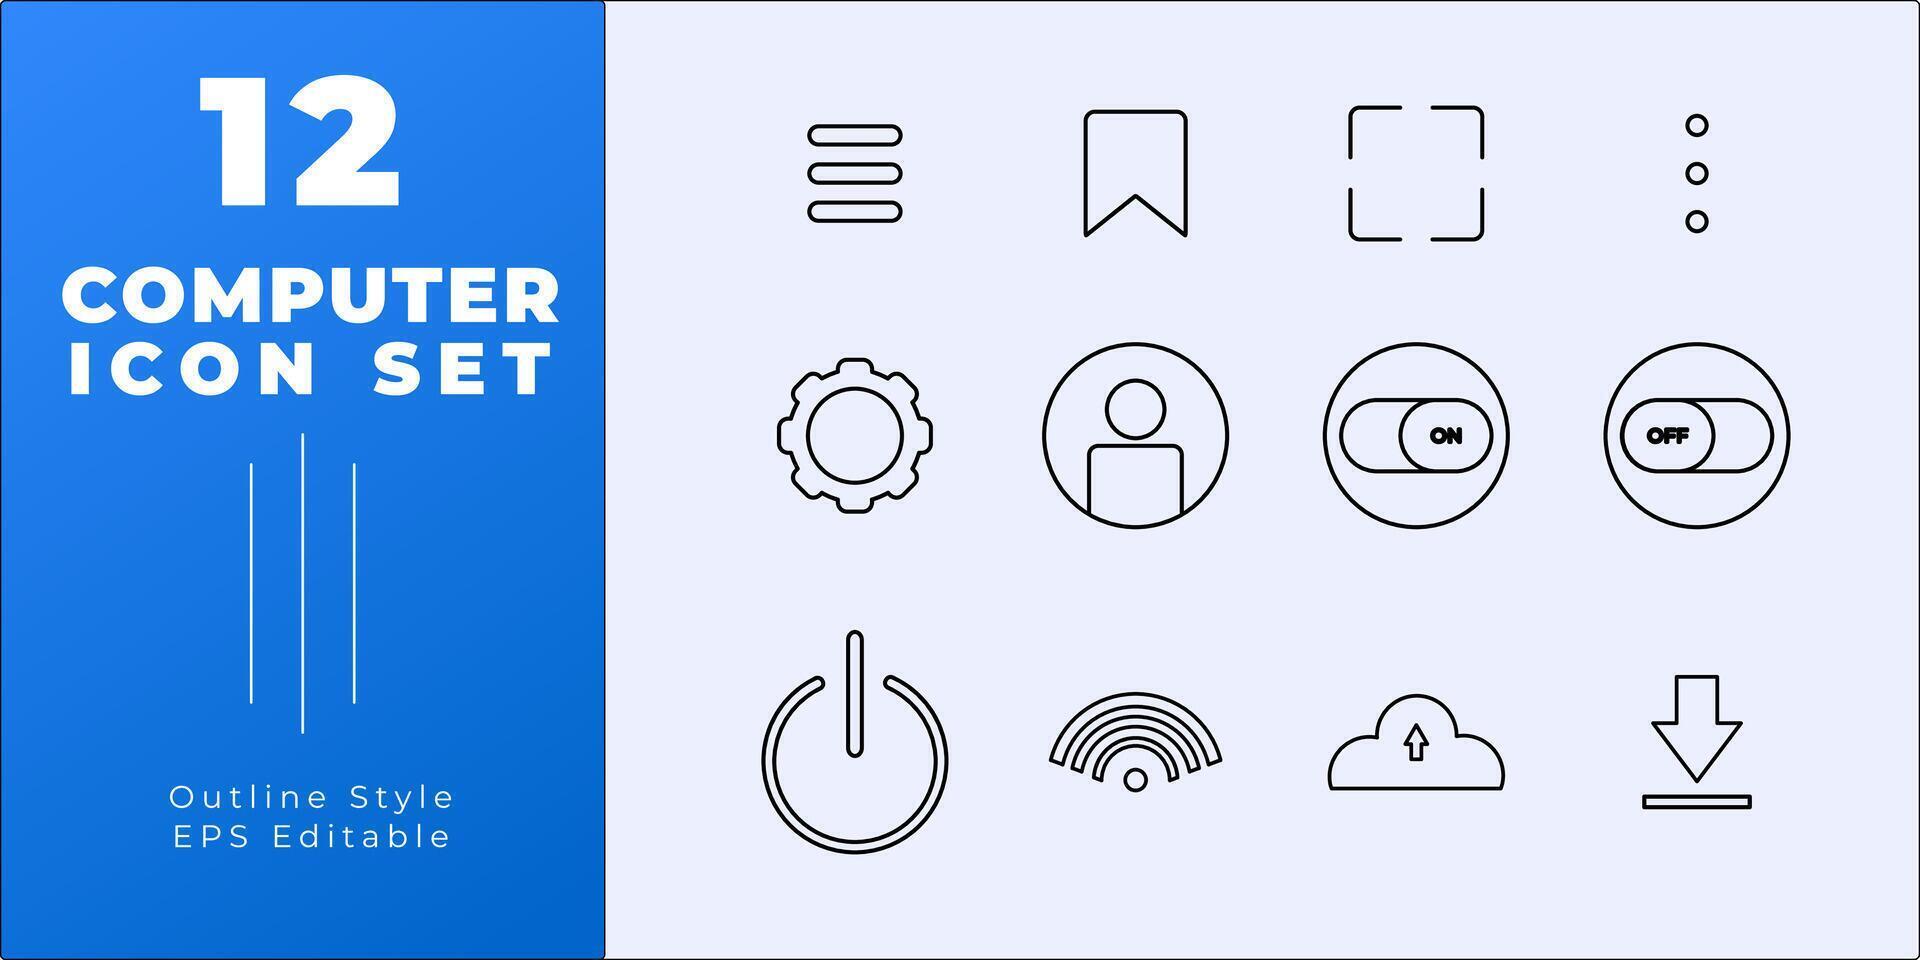 Computer Outline Style Icon Sets vector